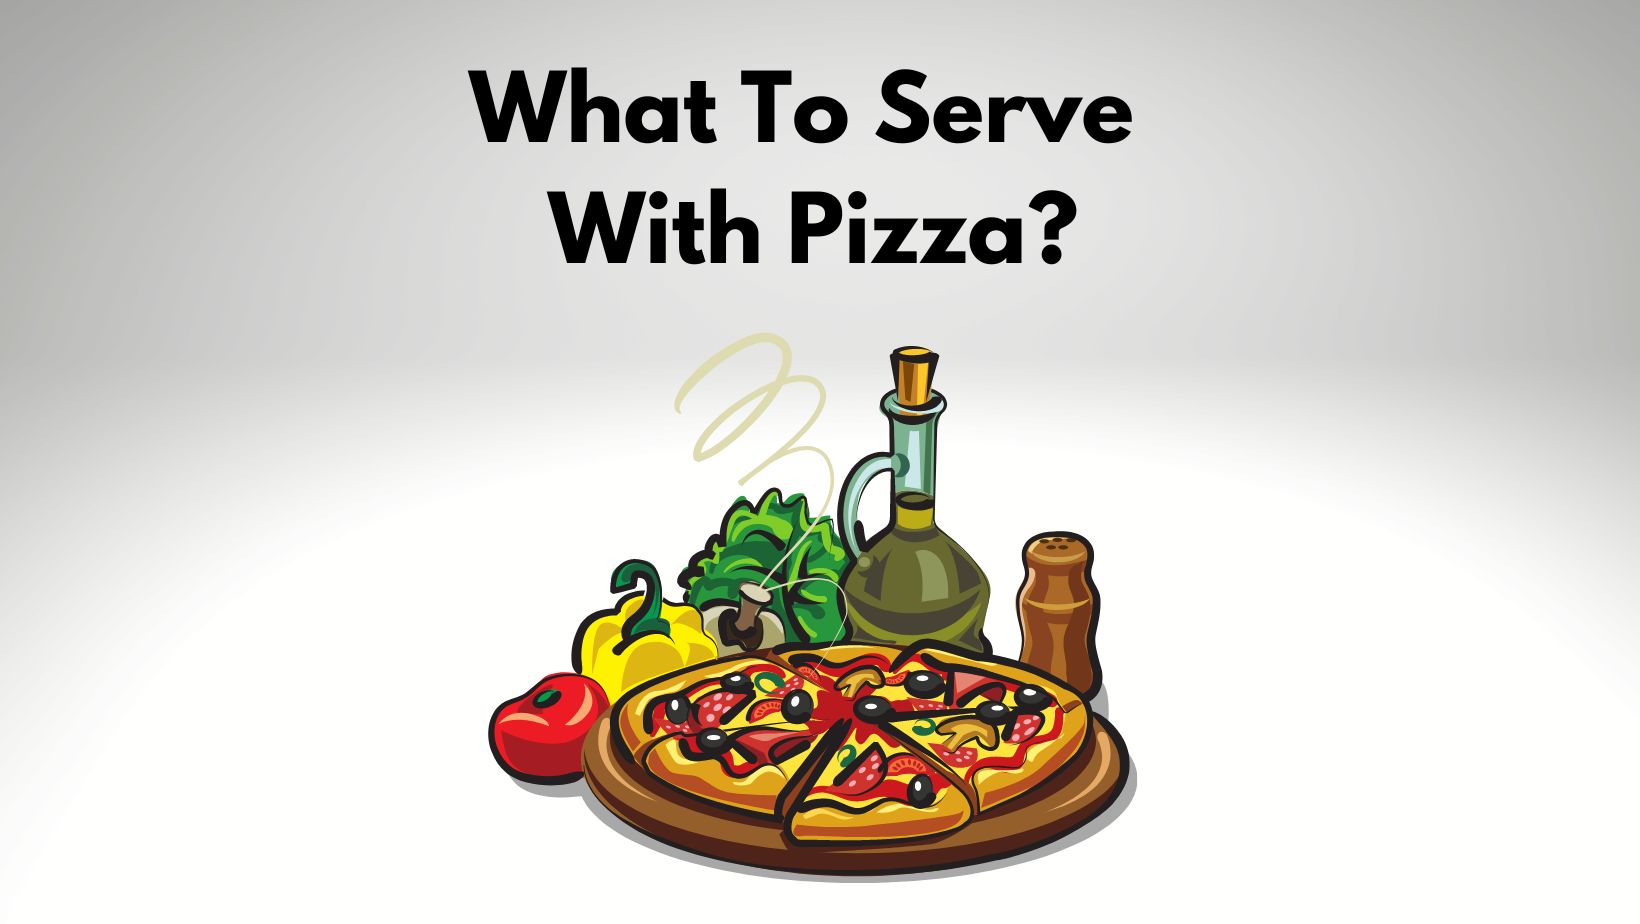 Serve with pizza